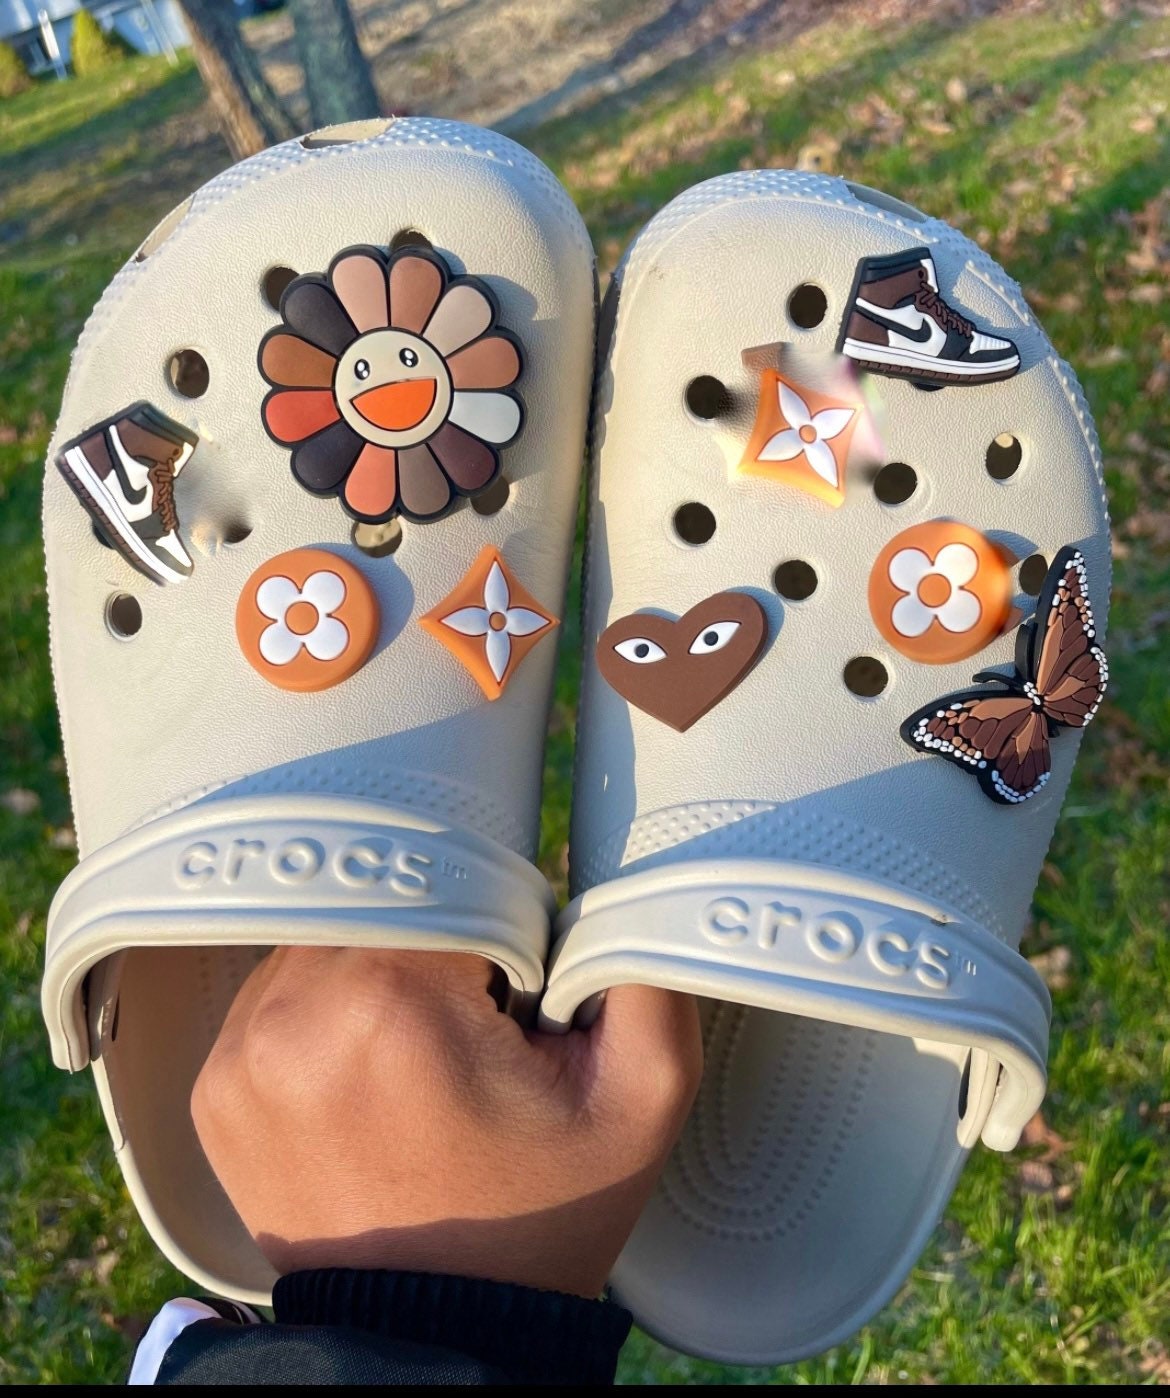 Brown Croc Clogs With Charms 